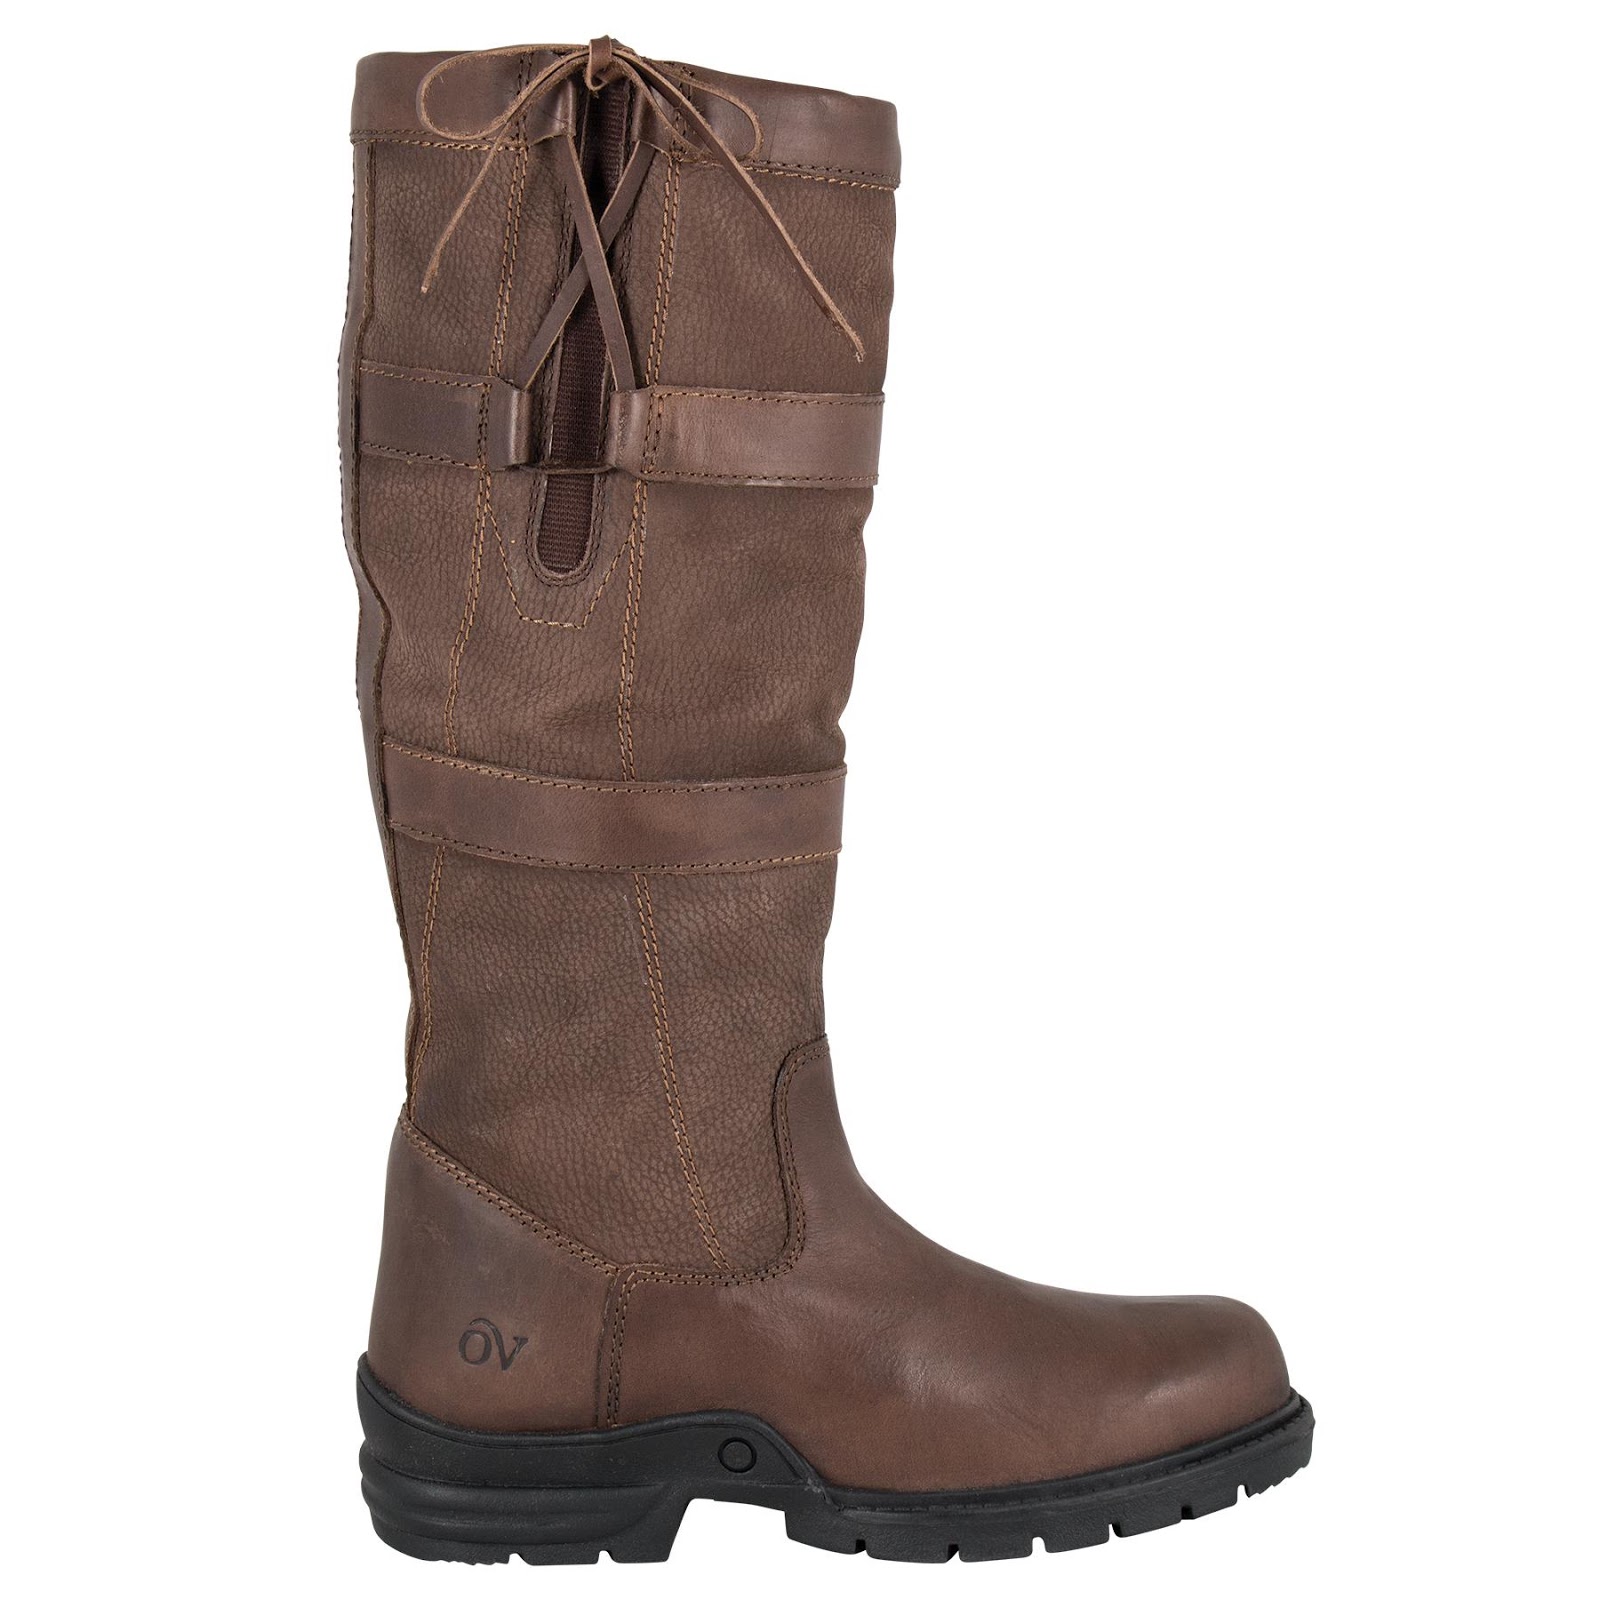 Horse Country Chic: Country Boots for Less